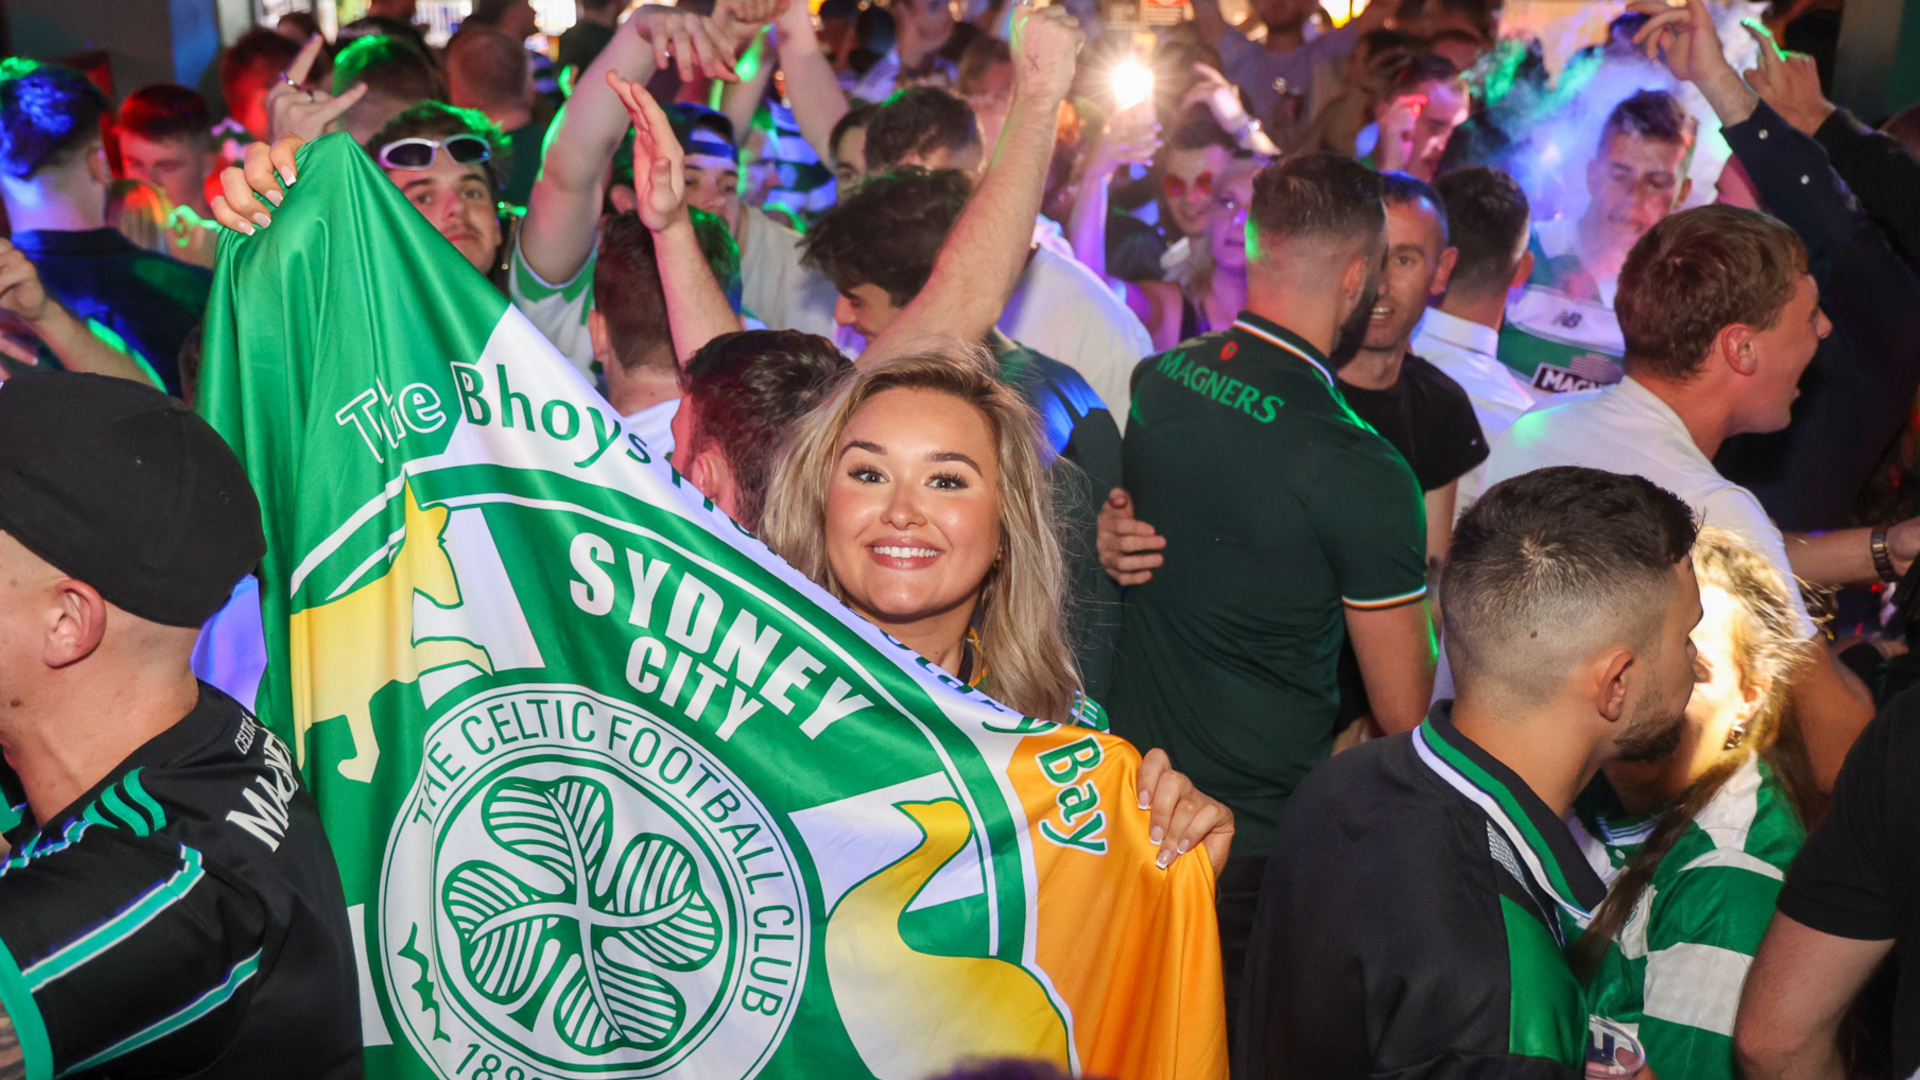 Sydney Celtic Supporters Club